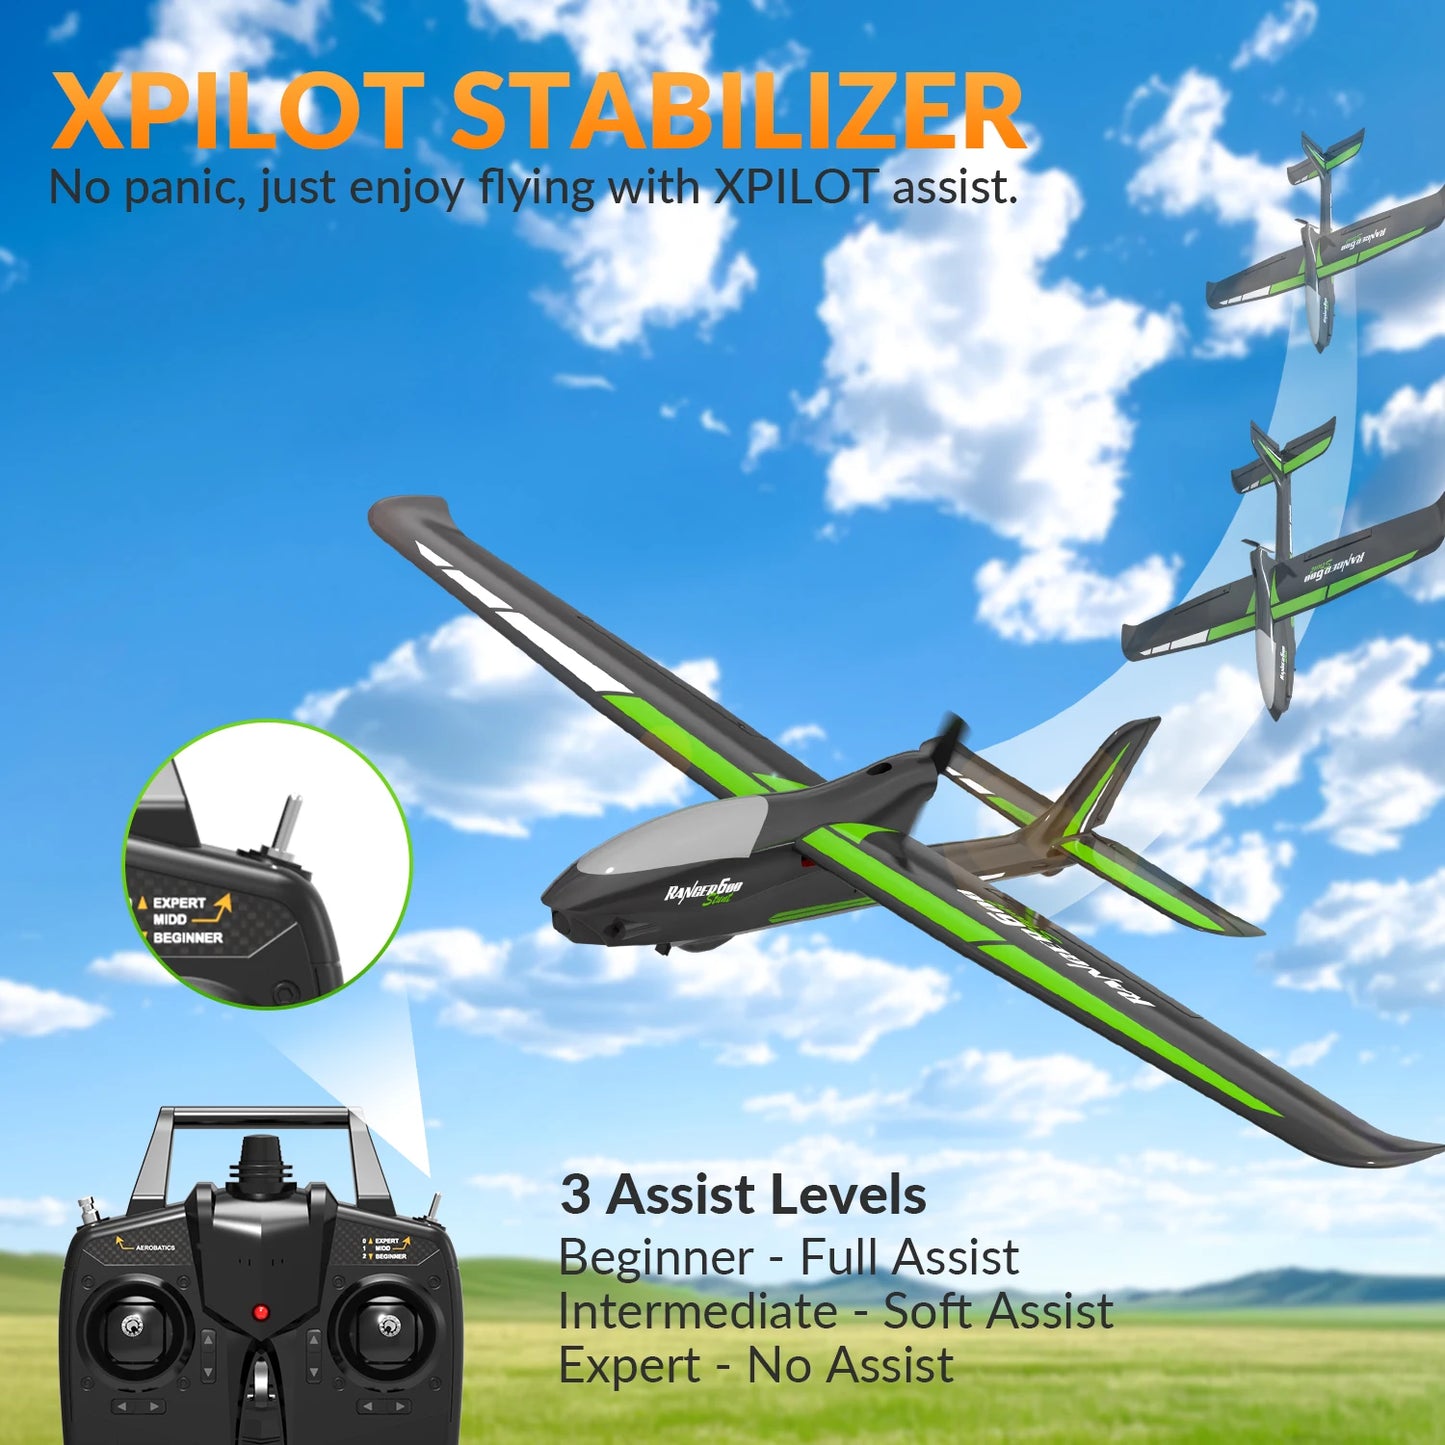 Ultimate Ranger600 Remote Control Airplane - Ready-to-Fly Fighter Jet with Gyro Stabilizer